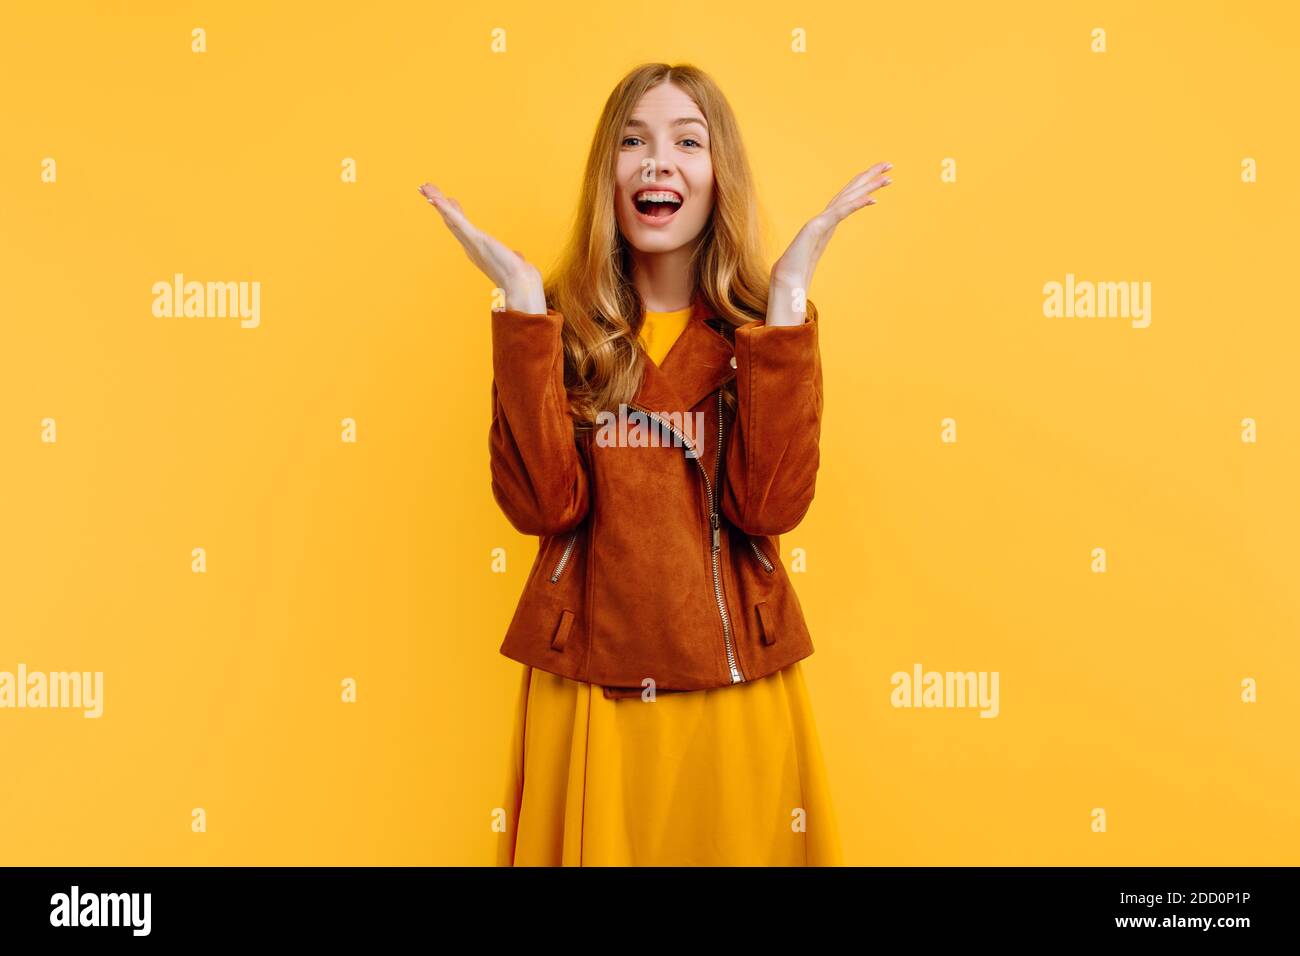 Excited, shocked, screaming, happy, beautiful girl, in a bright yellow dress and autumn jacket, is happy standing on an yellow background. The concept Stock Photo